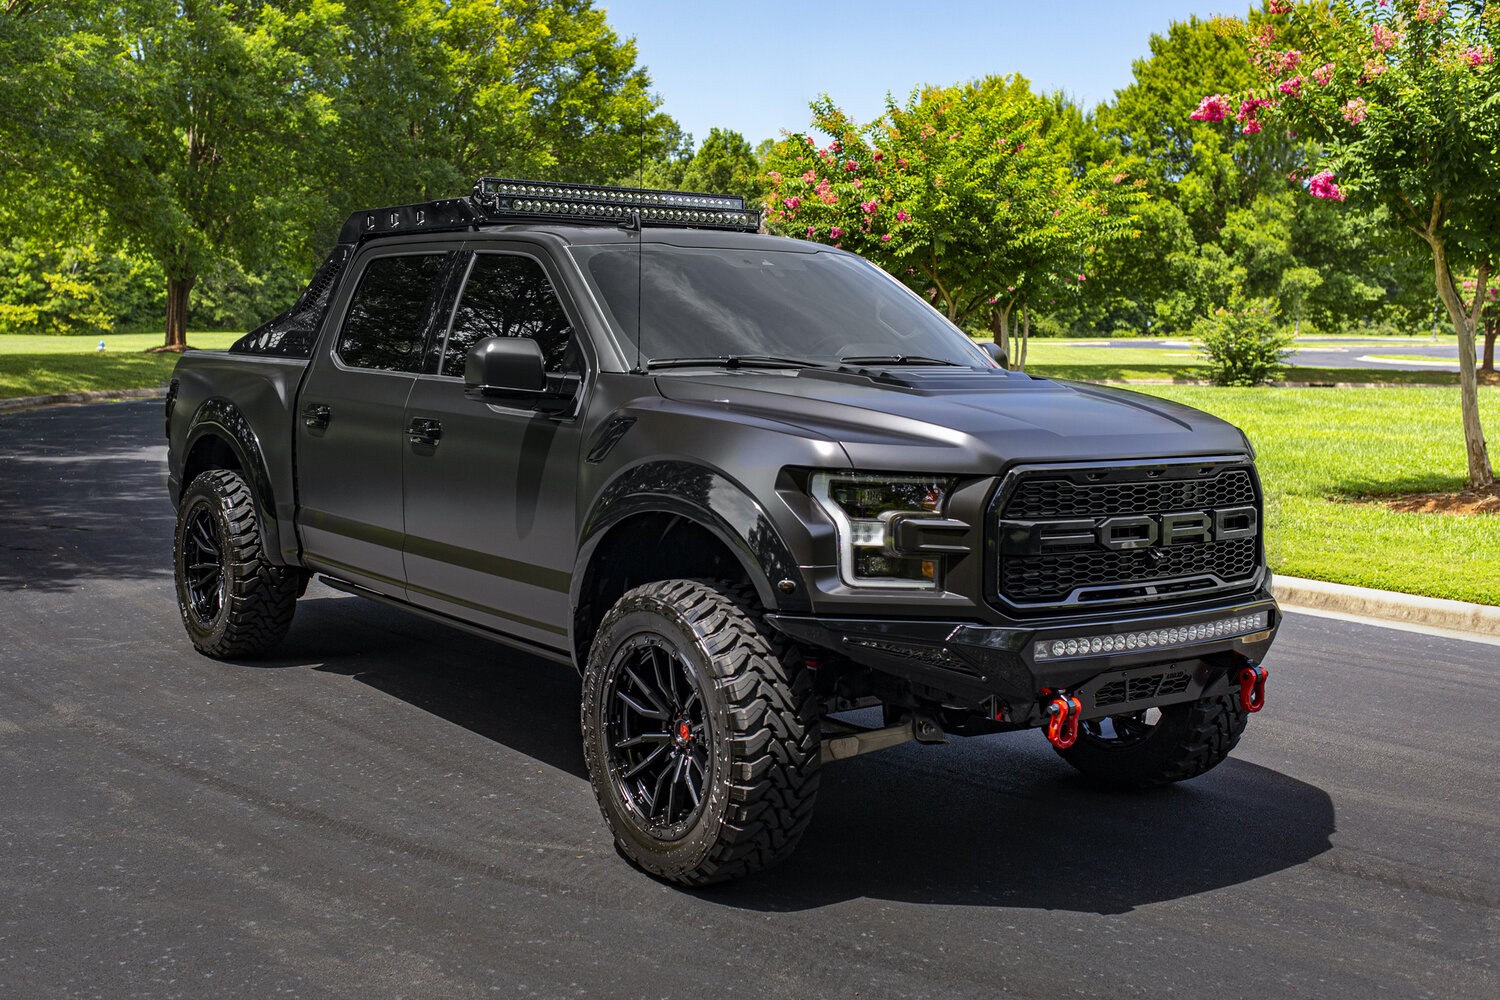 Zion Williamson Drives a Wild Ford F150 Raptor With OffRoad Mods and